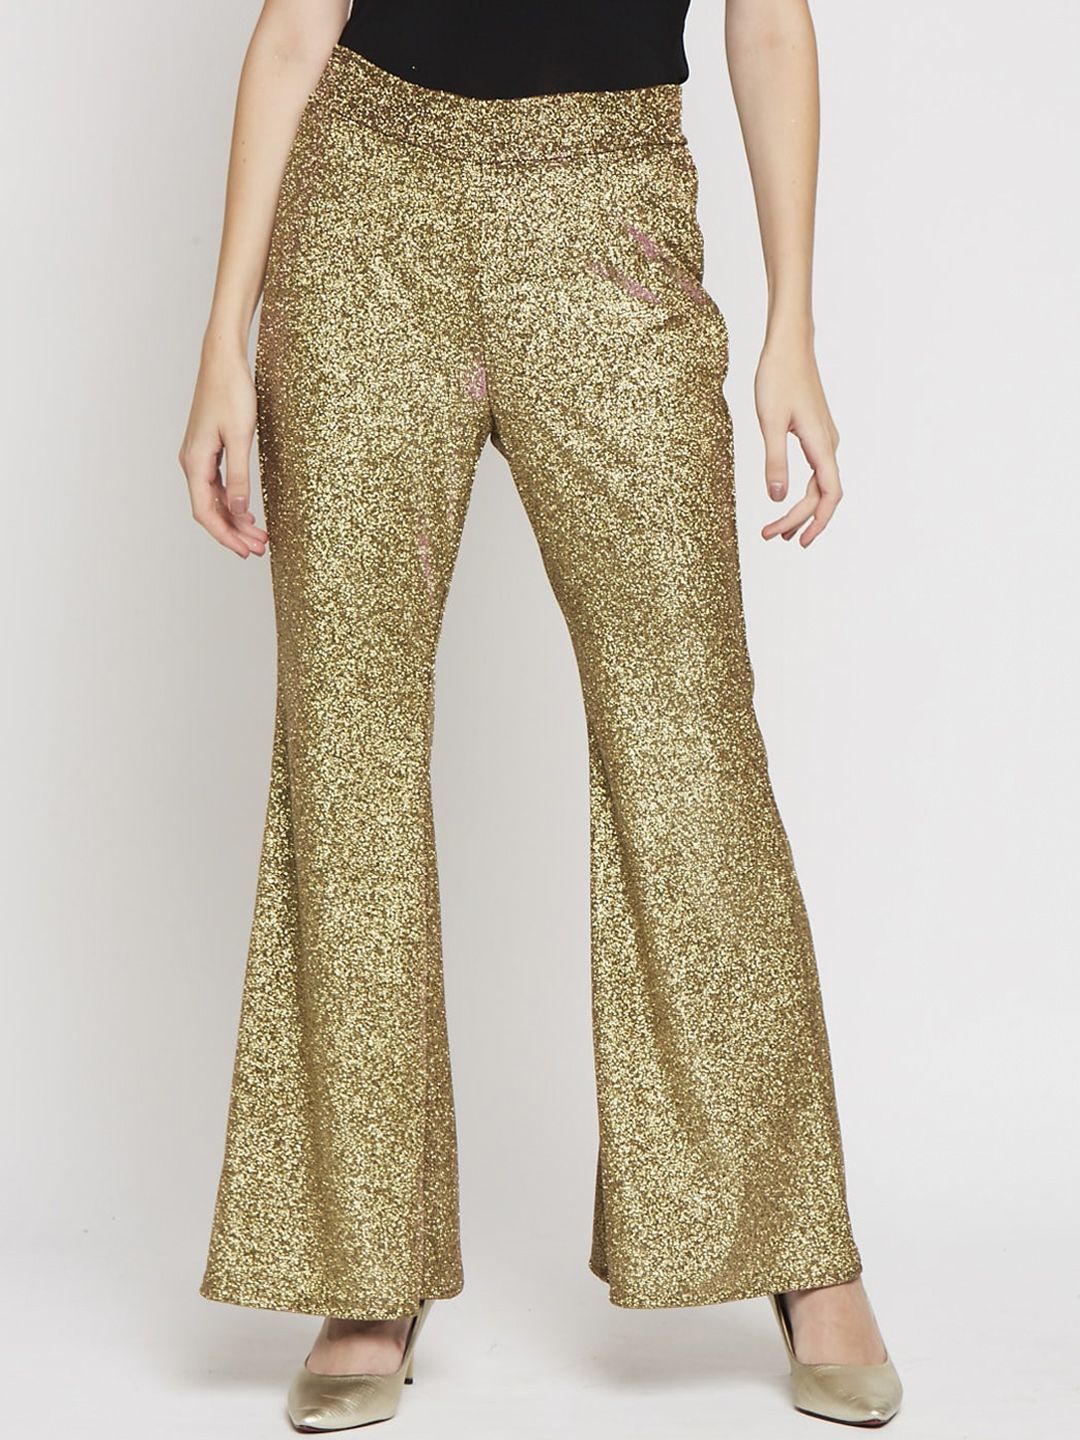 Ira Soleil Women Gold-Coloured Glitter Embellished Bootcut Trousers Price in India